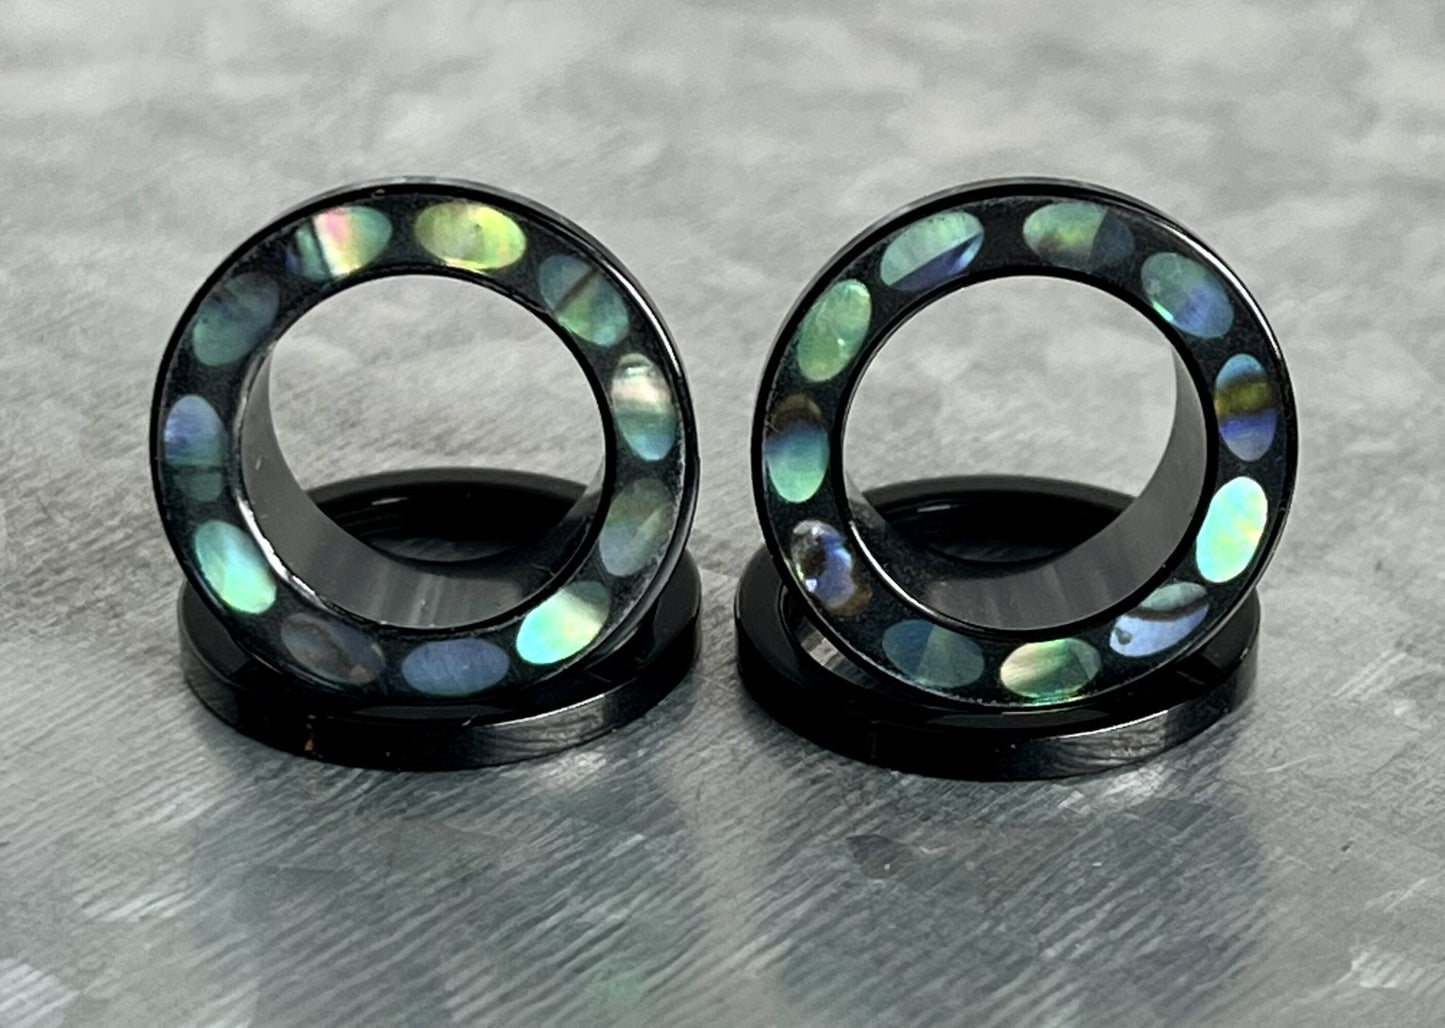 PAIR of Unique Abalone Inlaid Rim Acrylic Screw Fit Tunnels/Plugs - Gauges 0g (8mm) thru 5/8" (16mm) Available!